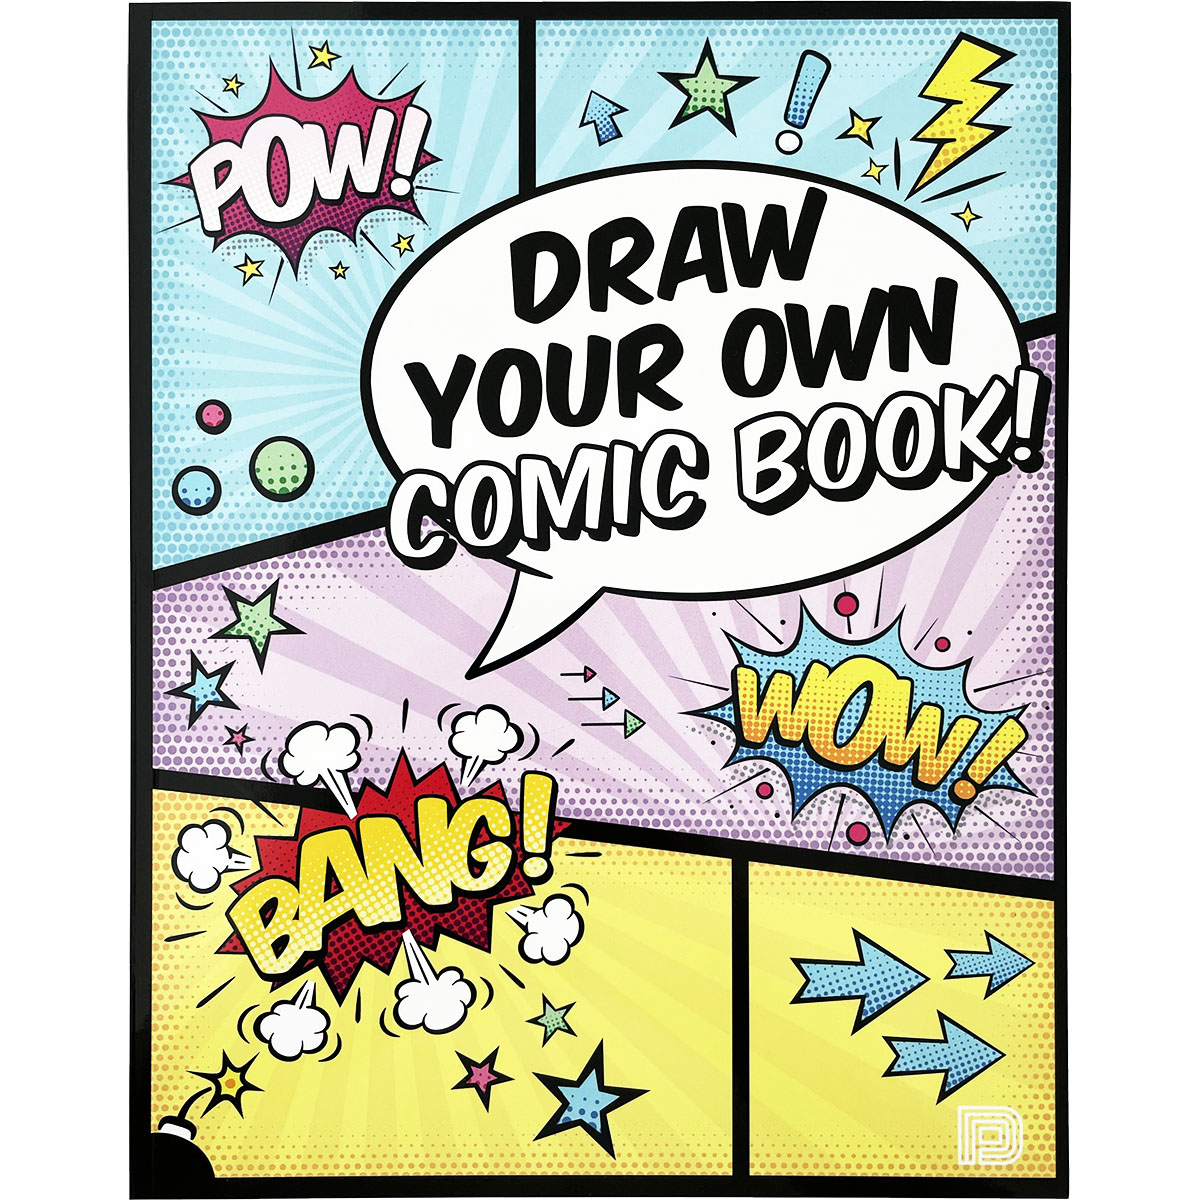 Draw your own comic book!